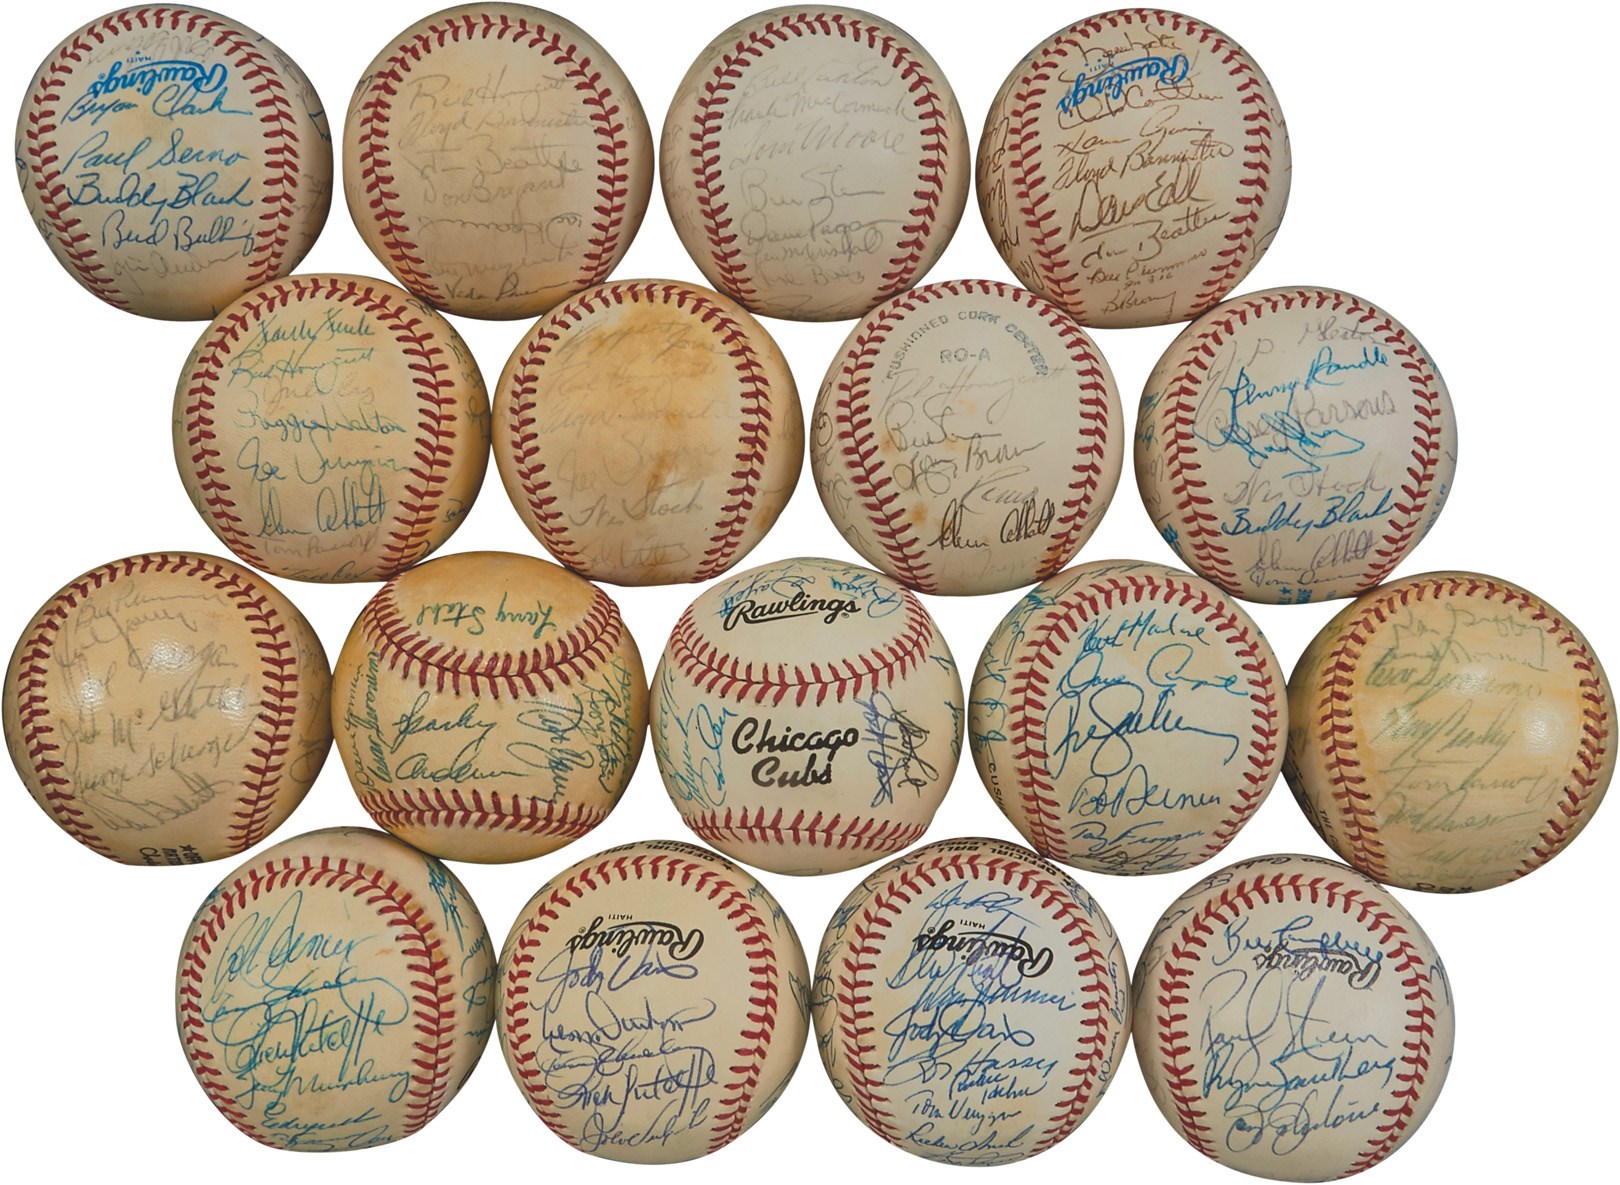 - 1970s-80s Reds, Mariners & Cubs Team-Signed Baseballs (17)